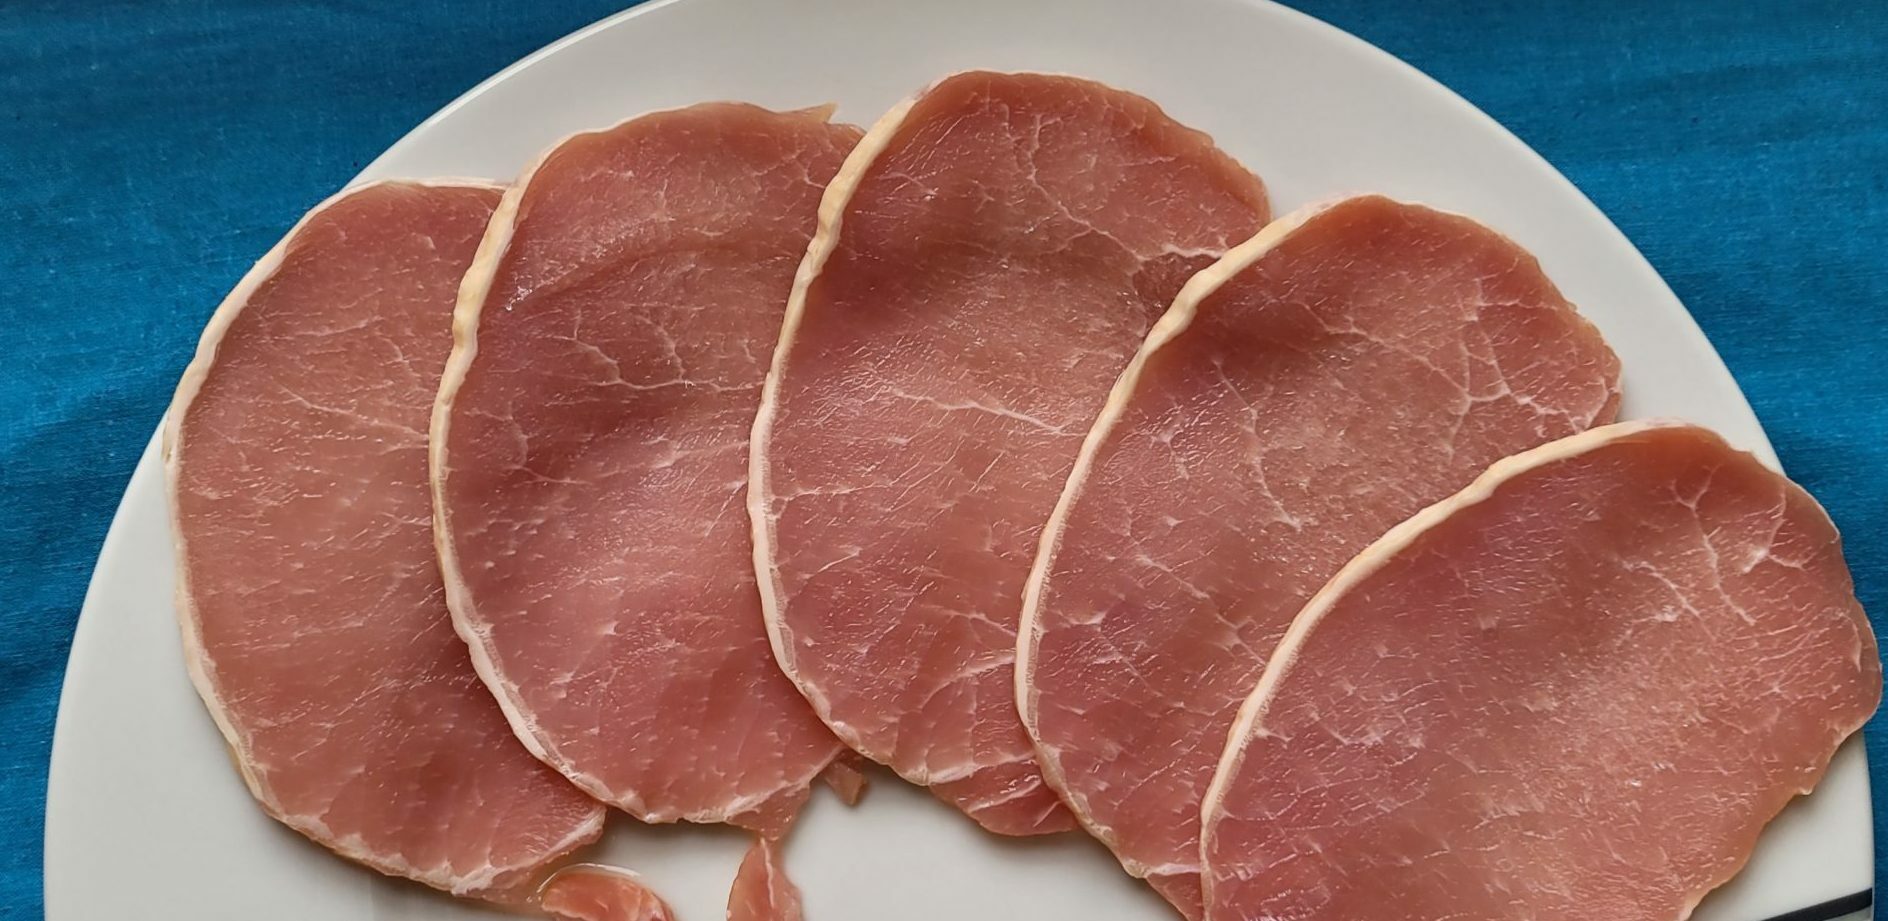 Bacon medallions on a plate